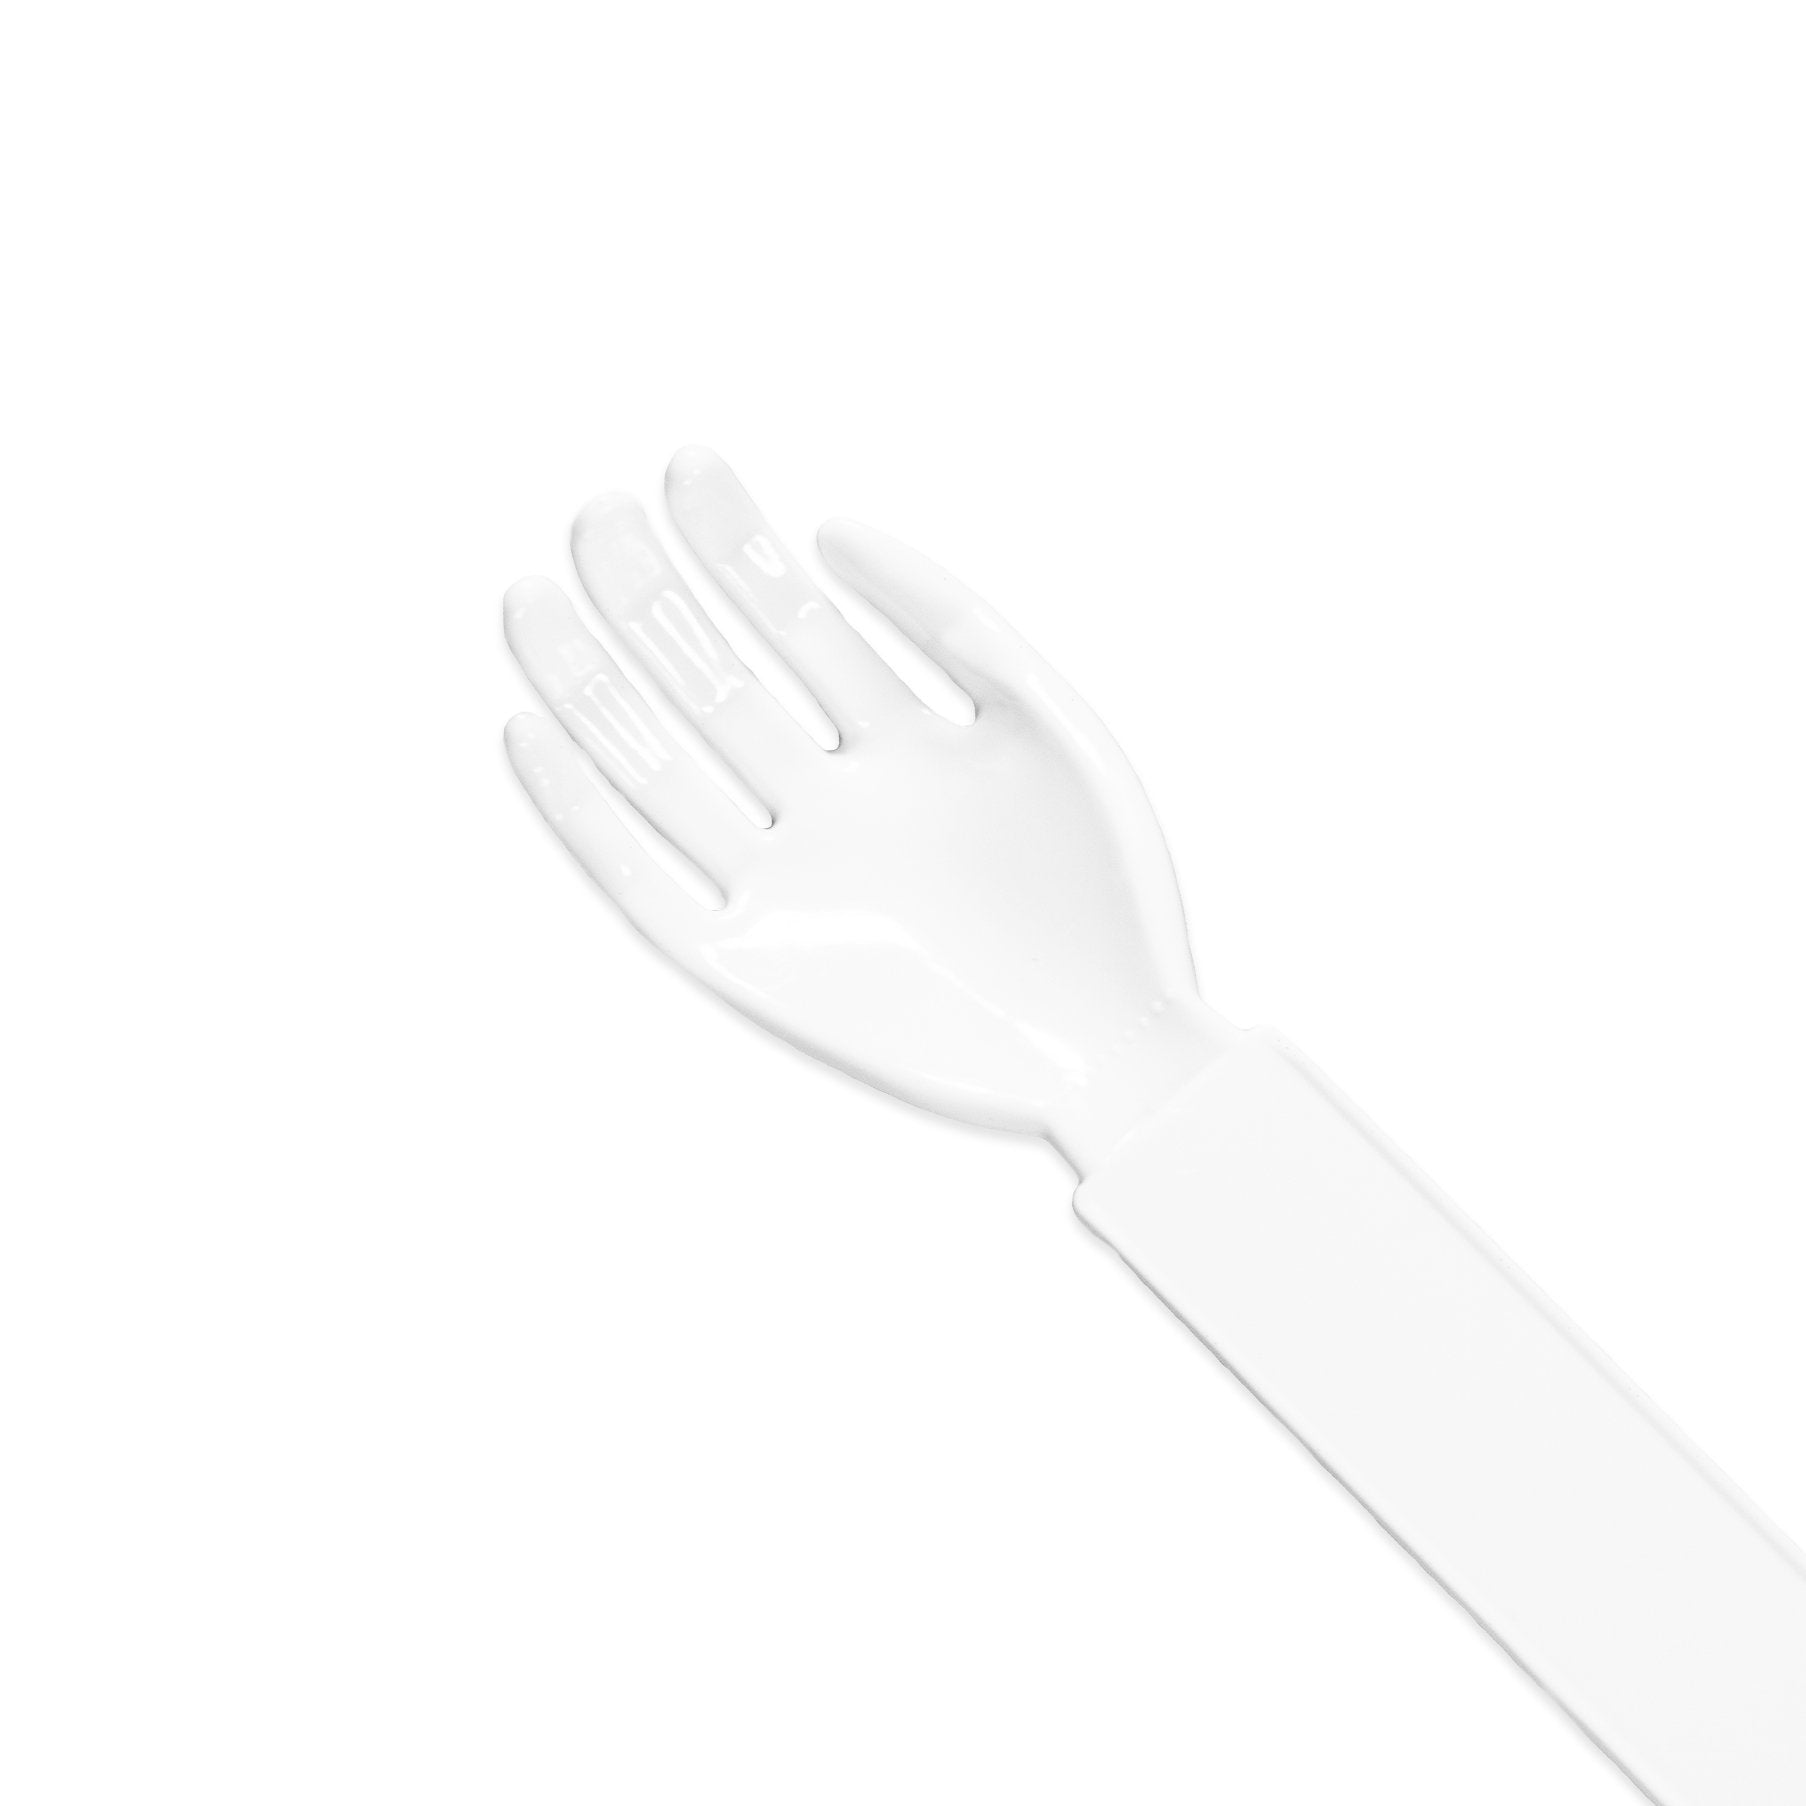 A close up photo of a white double ended shoe horn and back scratcher against a white background.  The photo shoes the back scratcher portion which is in the shape of a hand.